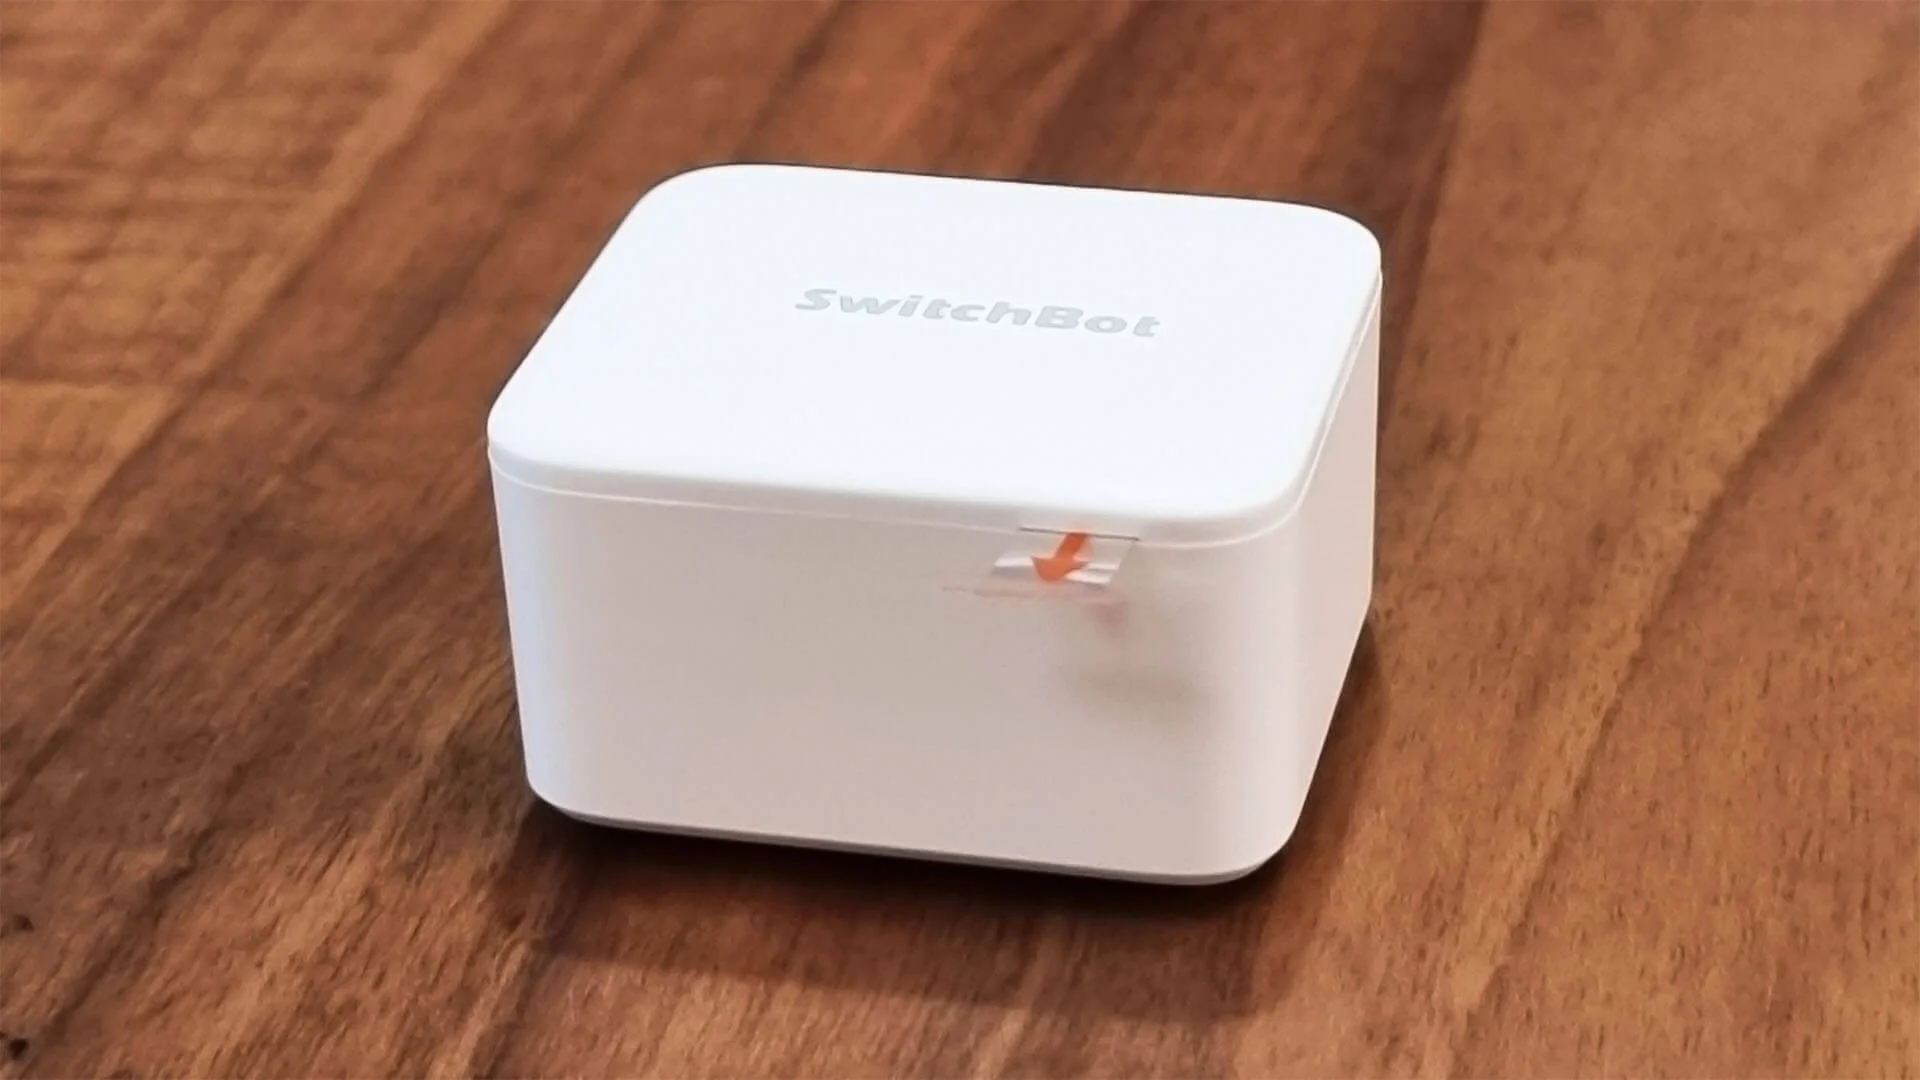 SwitchBot is the smart home stuff I recommend to doubters, and it's on sale